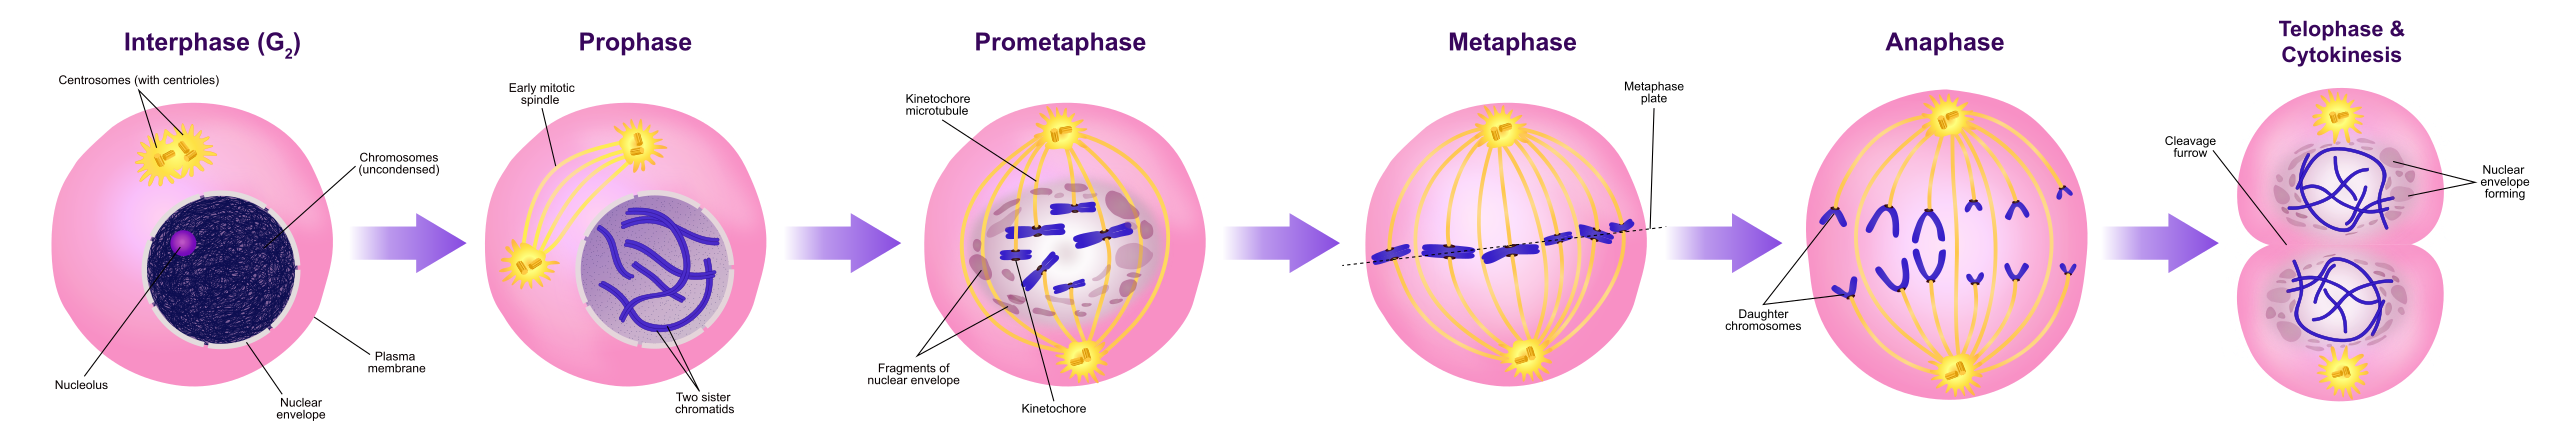 A diagram of mitosis stages. The cell is illustrated during interphase (G₂), prophase, prometaphase, metaphase, anaphase, and telophase & cytokinesis.